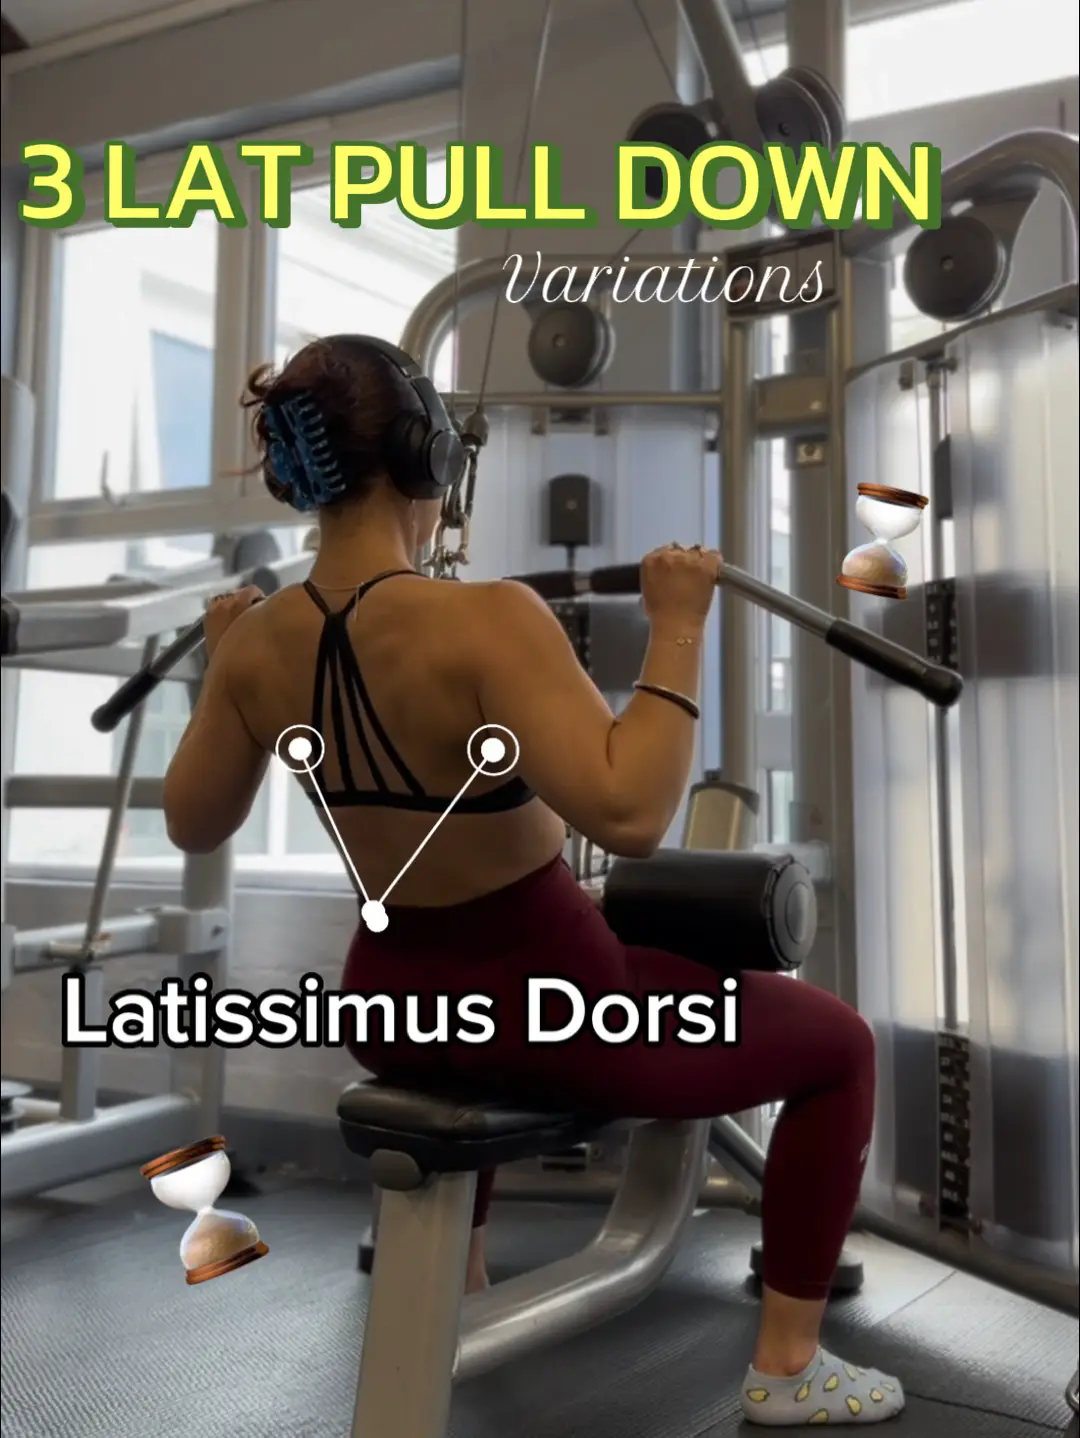 ✓3 lat pull down variations and muscle activation✓